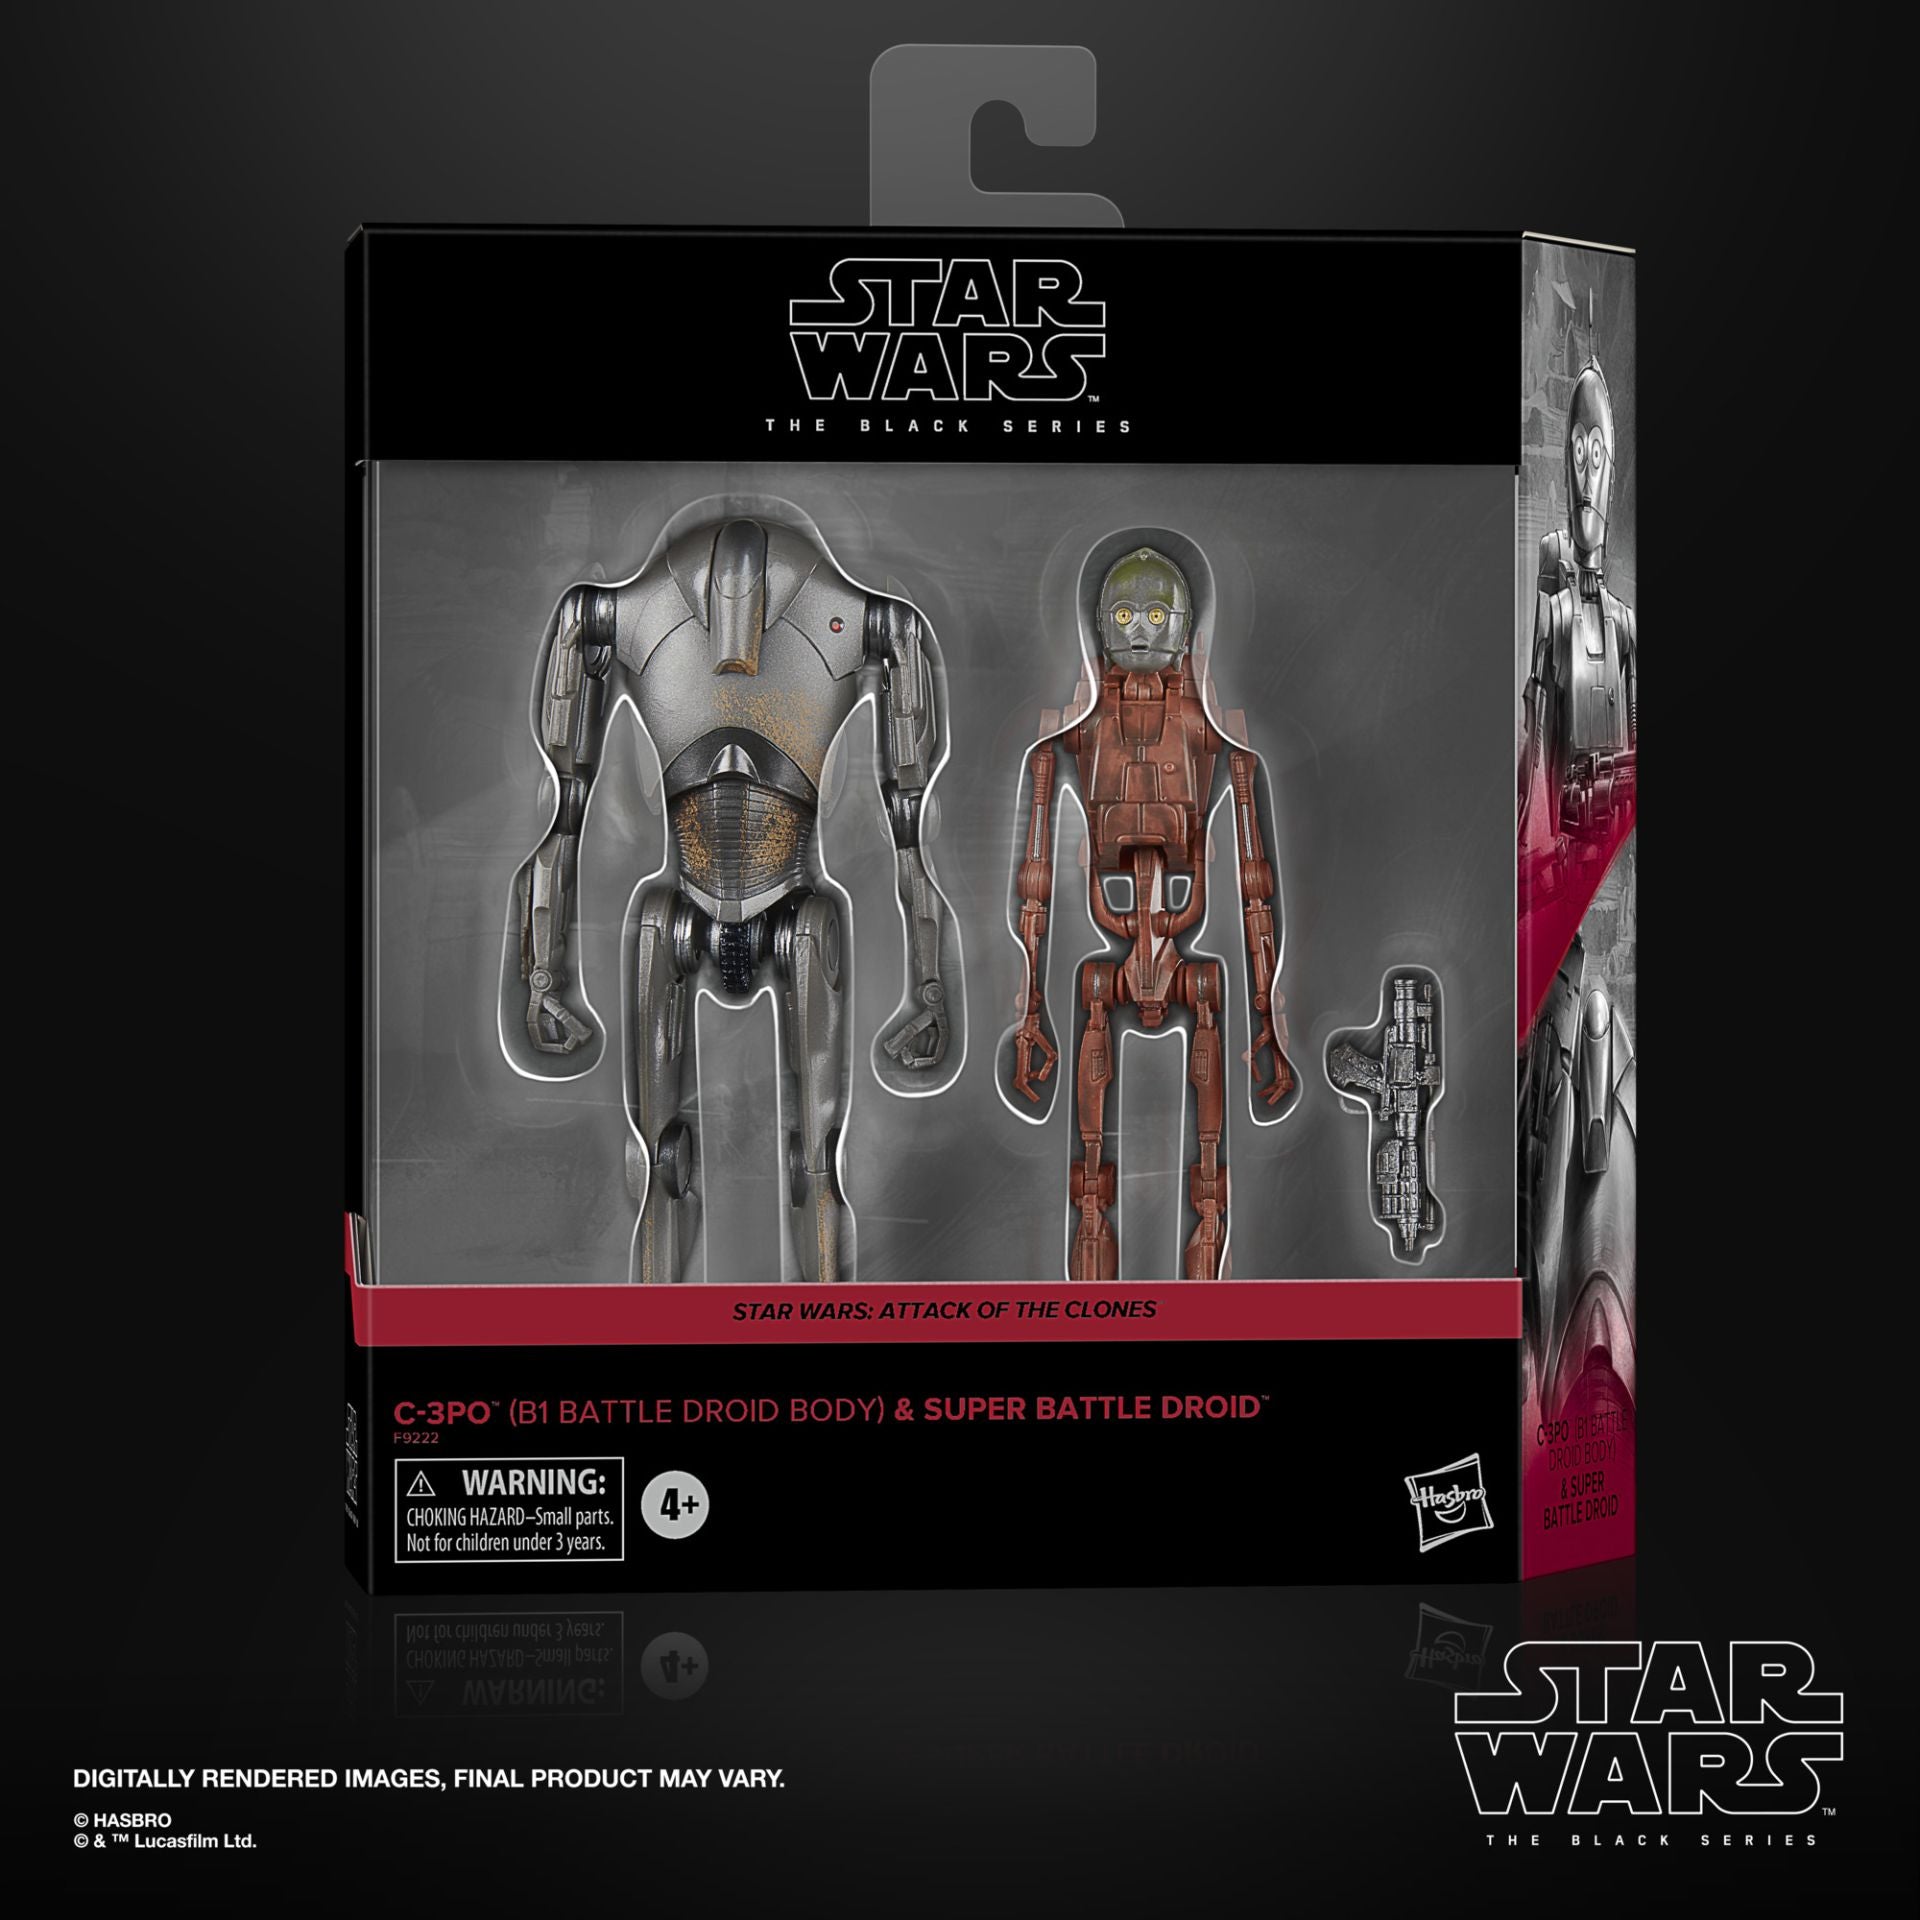 Star Wars The Black Series Attack Of The Clones C-3P0 (B1 Battle Droid Body) & Super Battle Droid Two Pack Hasbro